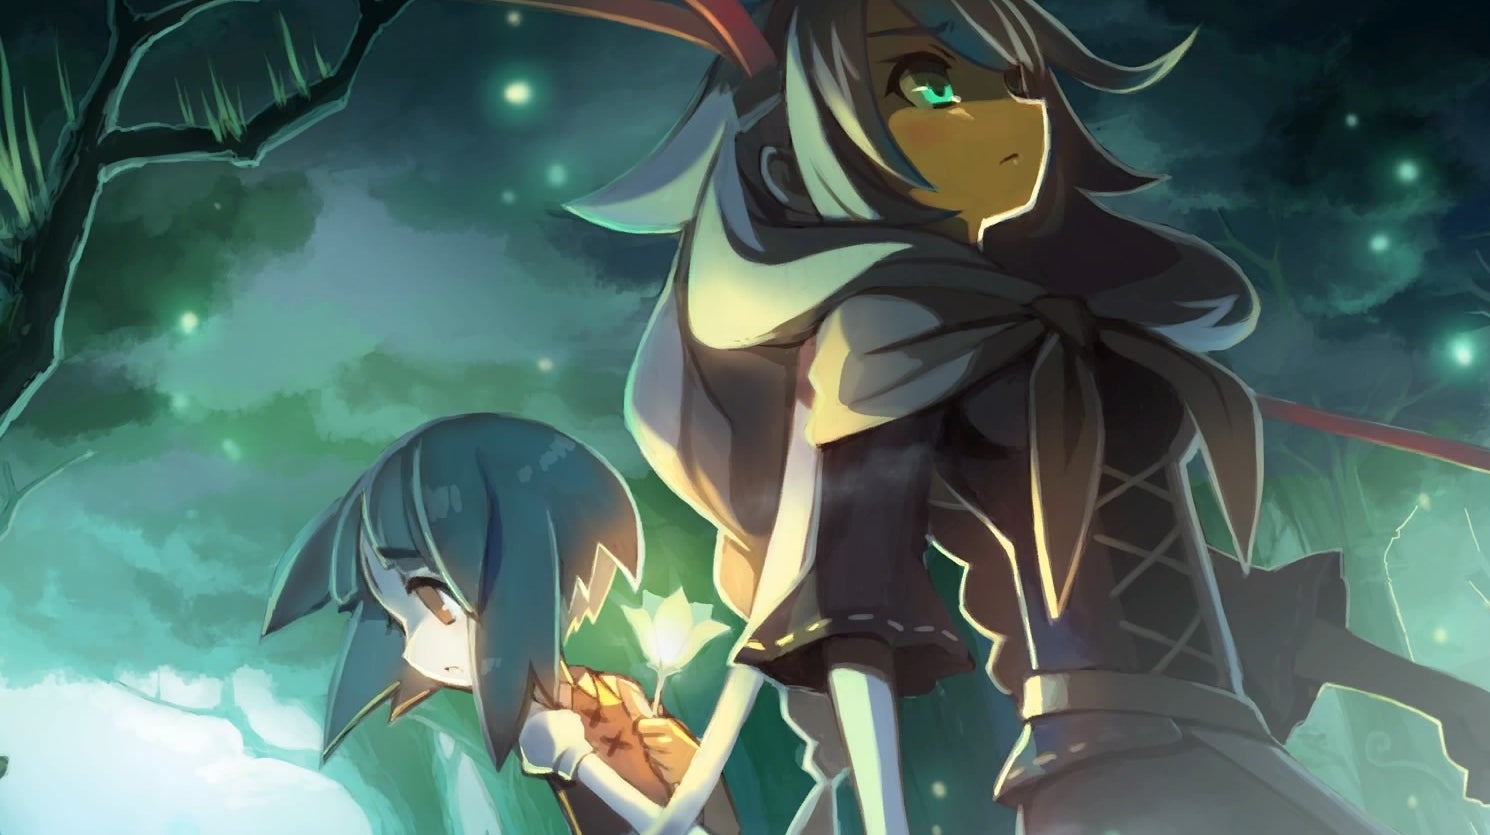 Immagine di The Witch and the Hundred Knight 2 - recensione